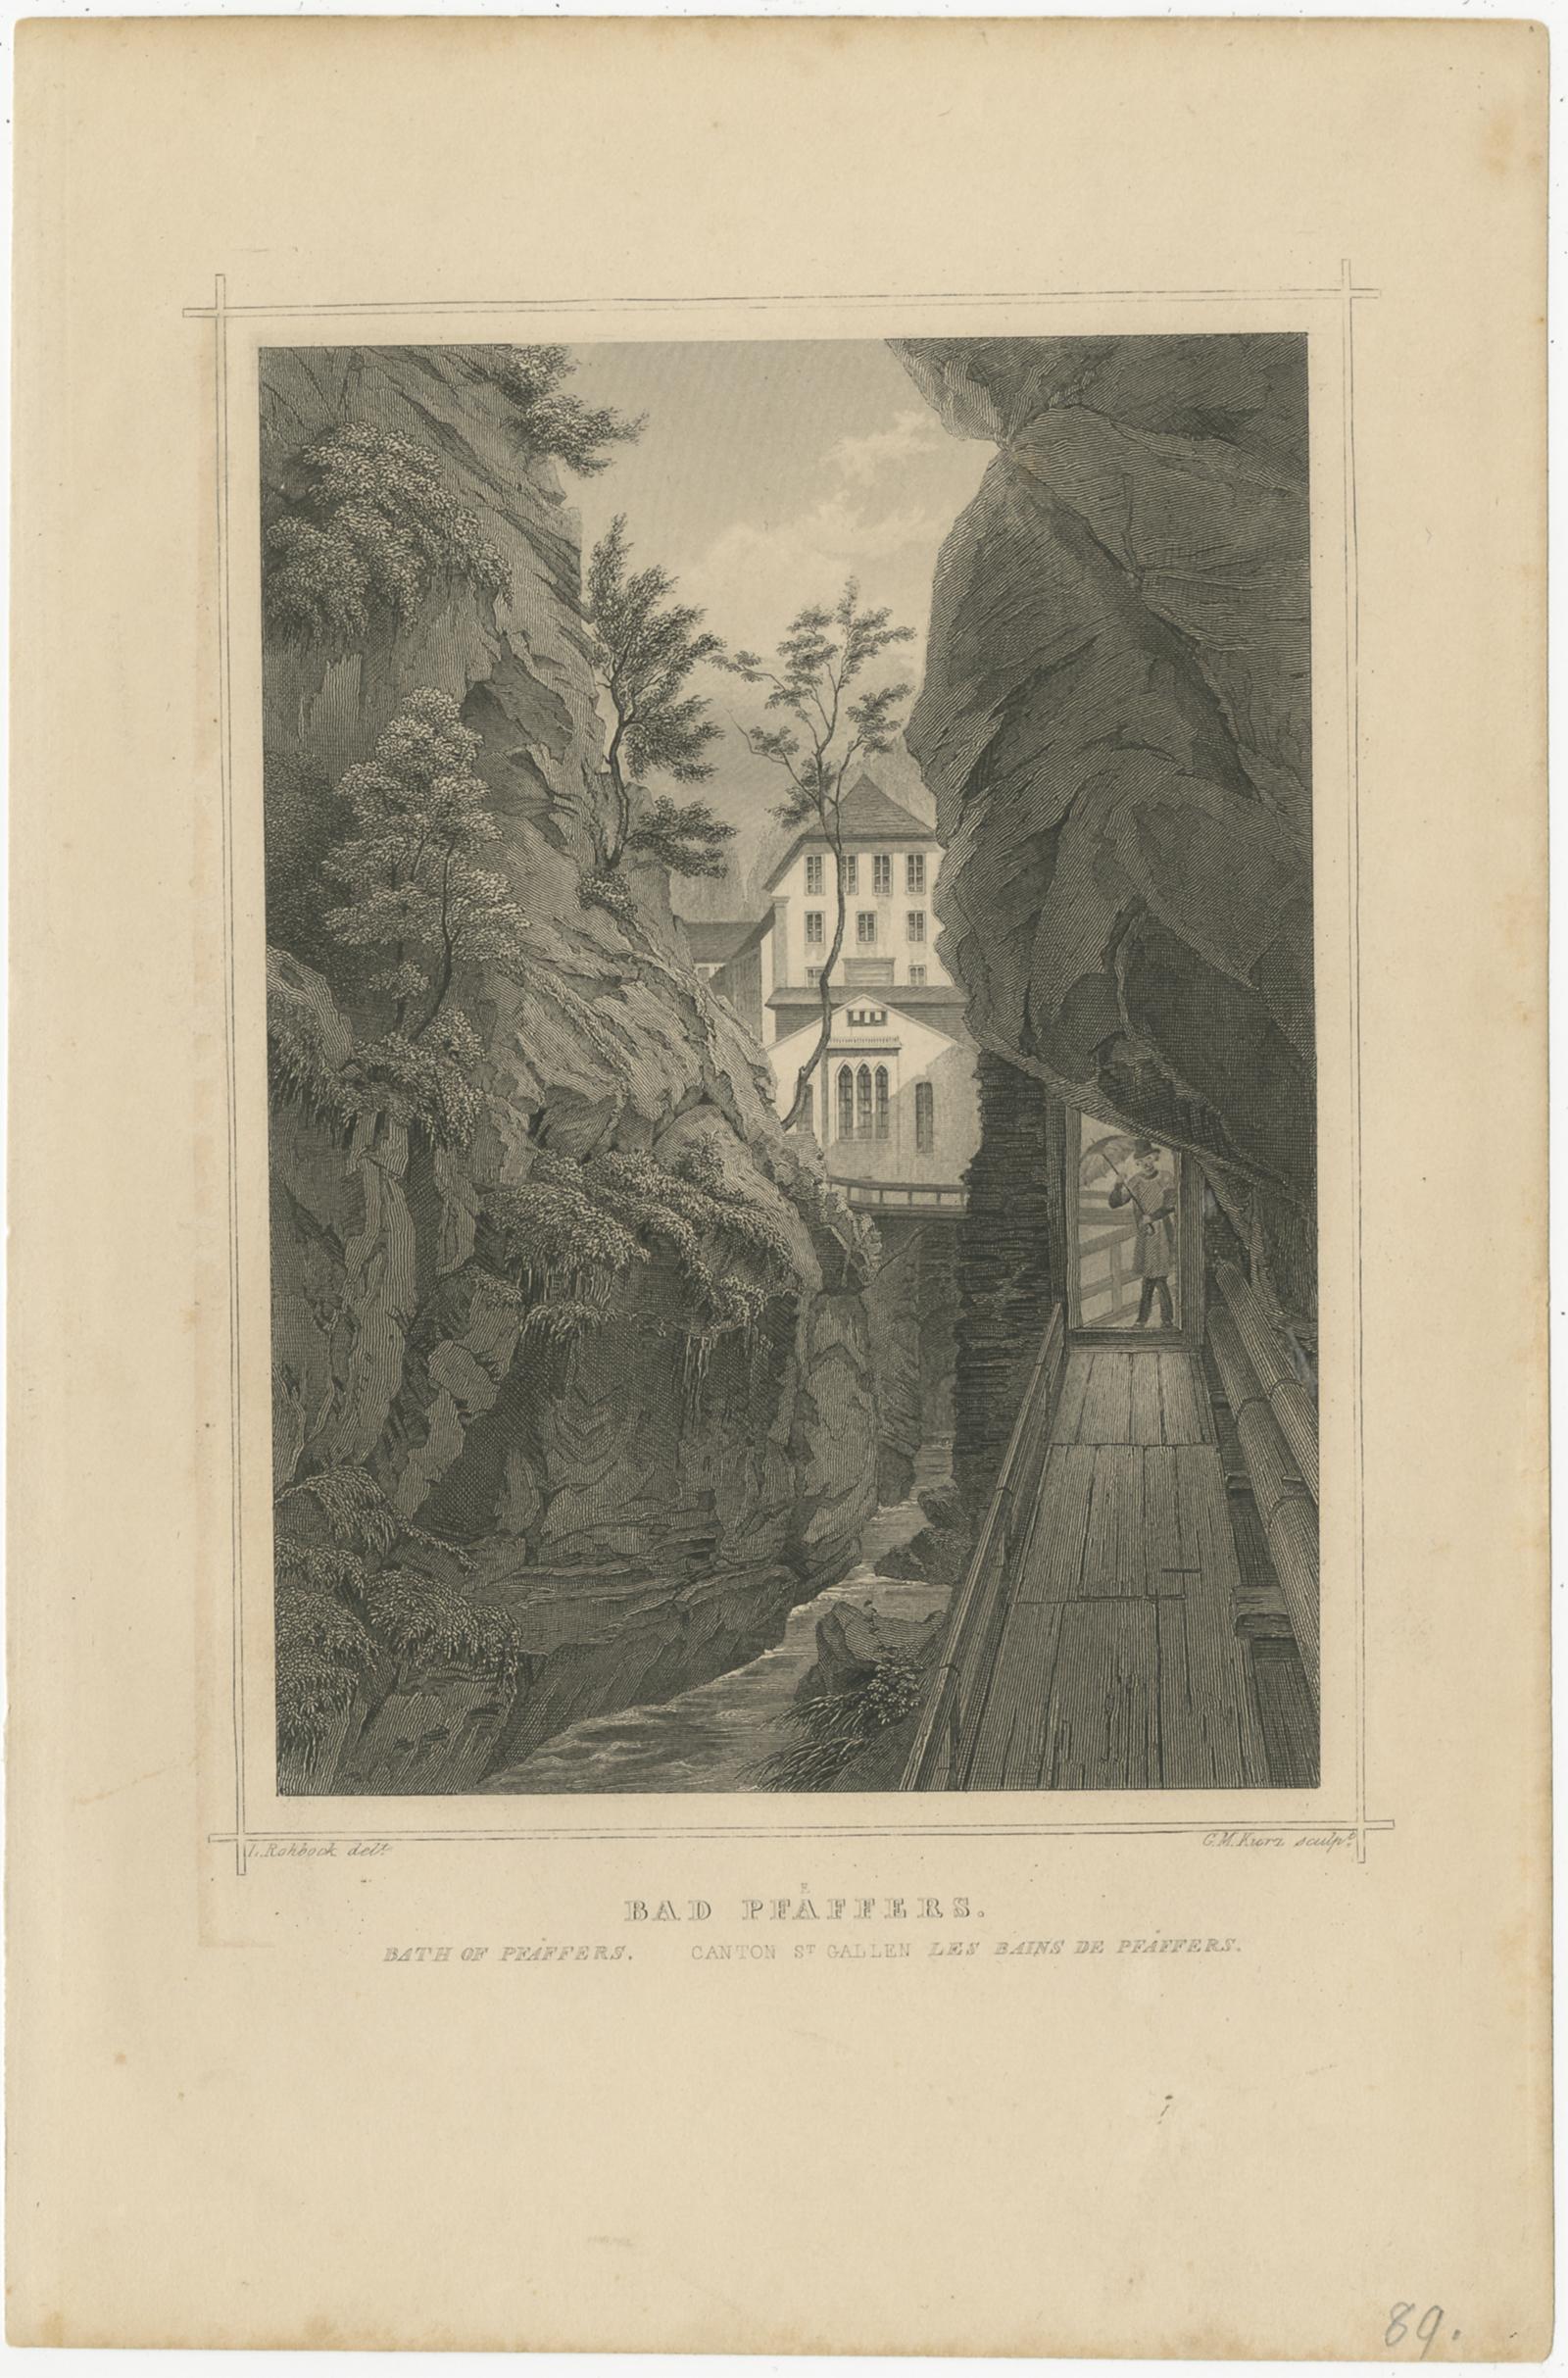 Antique print titled 'Bad Pfaeffers, Canton St. Gallen'. View of Bad Pfäfers, or Pfäfers Spa. Today, it is the oldest Baroque bath-house in Switzerland, houses a restaurant and a museum.

Engraved by G.M. Kurz after Rohbock. Published circa 1860.